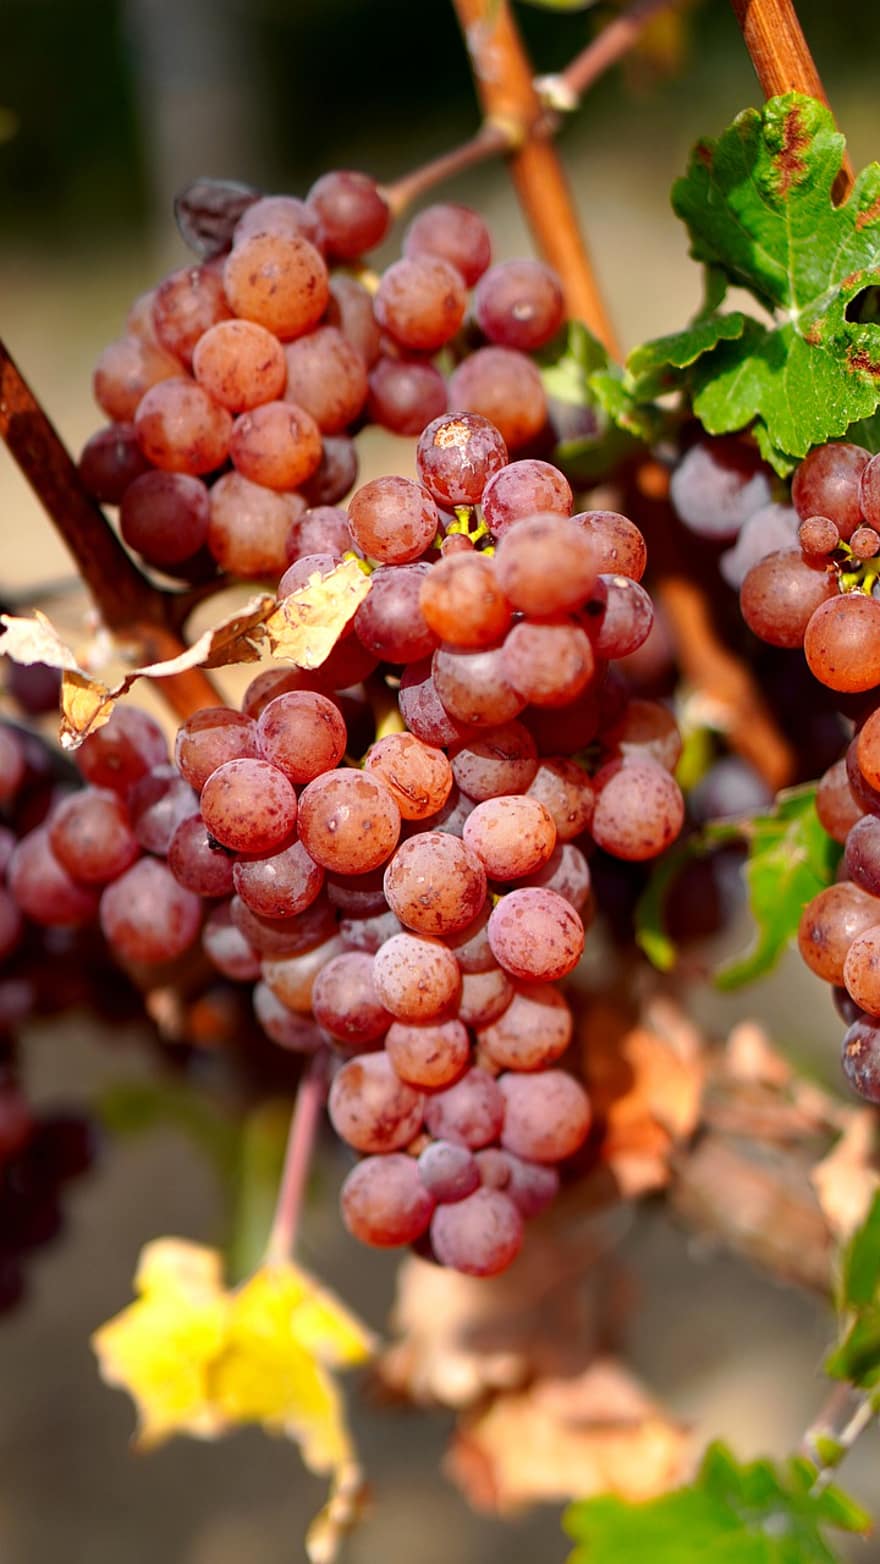 Grapes, Fruits, Vineyard, Grapevine, Vine, Food, Healthy, Vitamins, Nutrition, Viticulture, Agriculture